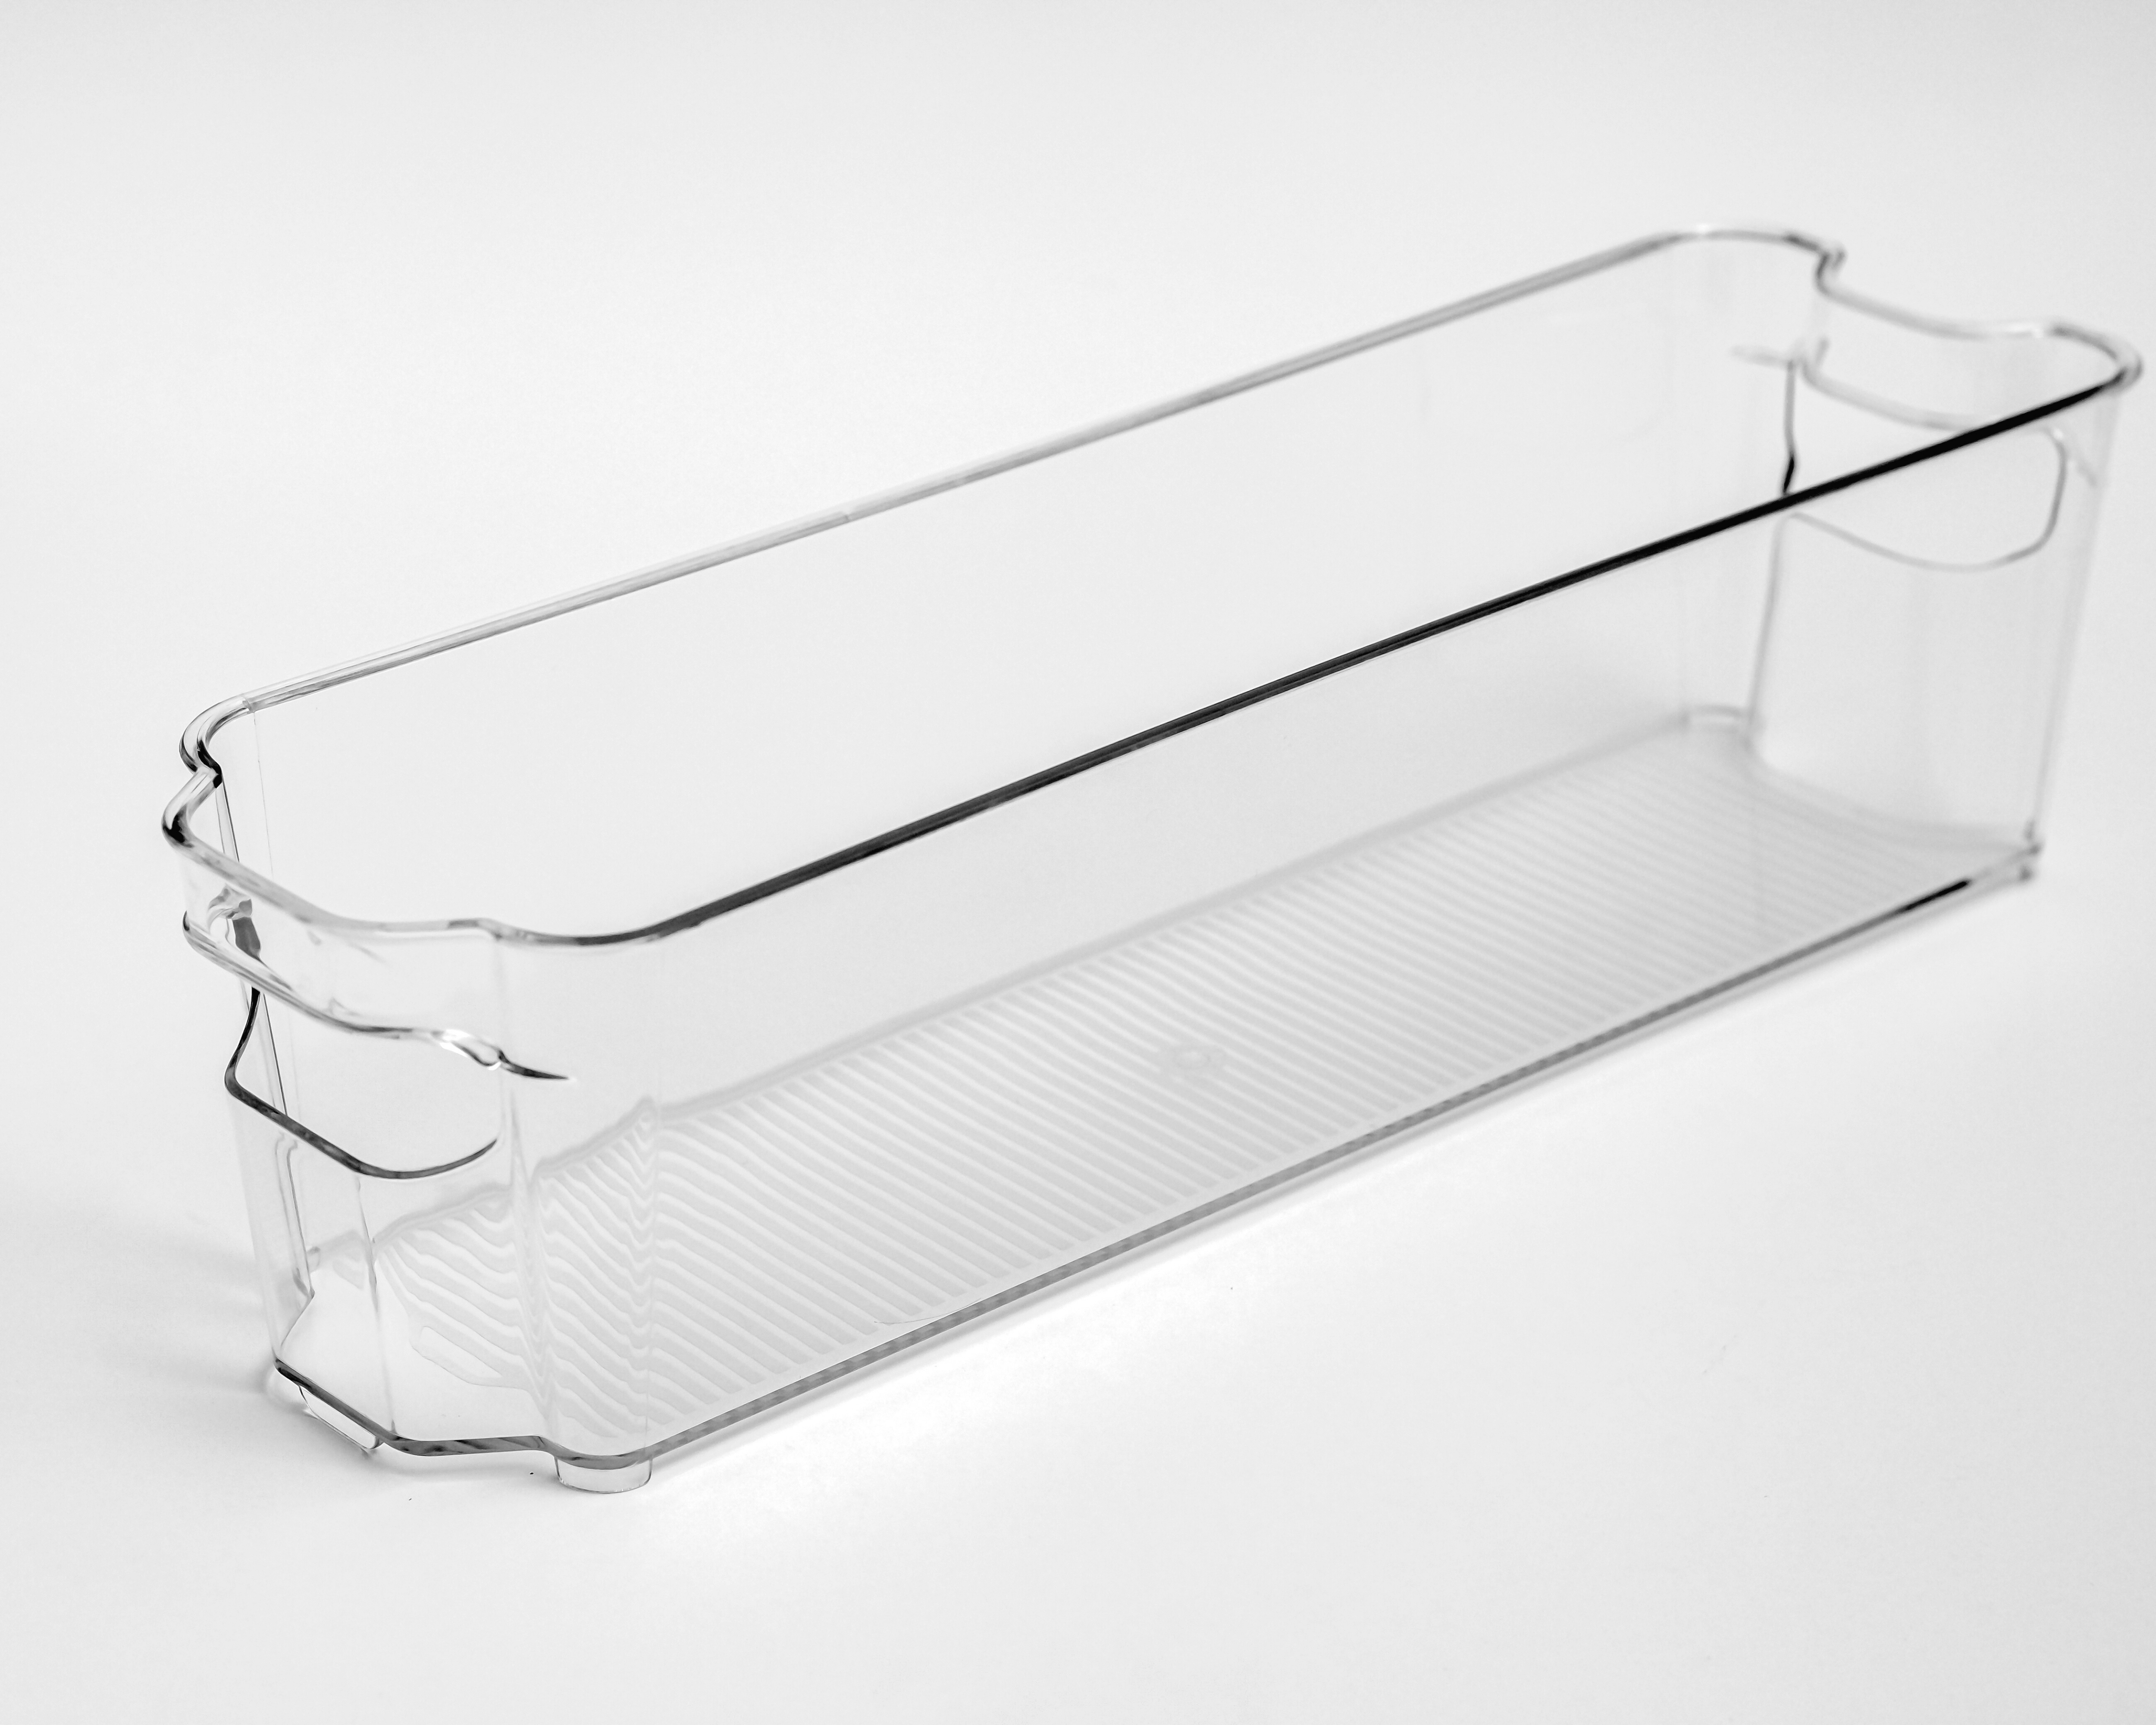 Acrylic Container 